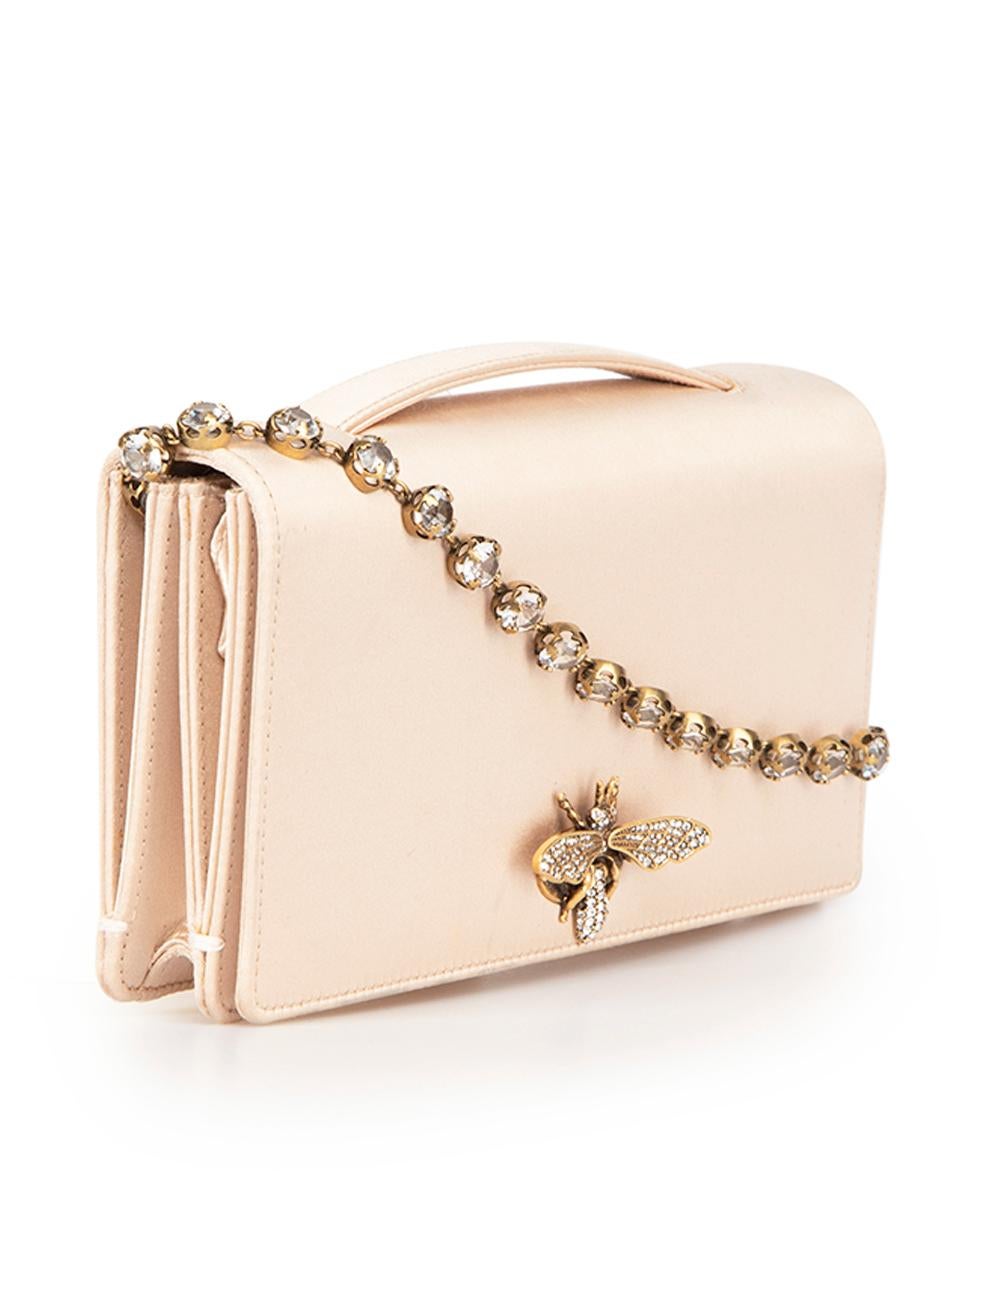 CONDITION is Good. Minor wear to bag is evident. Light wear to the front, back, top and lining with discoloured marks to the silk on this used Dior designer resale item.
 
 Details
 D-Bee model
 Pink
 Satin
 Mini clutch bag
 1x Gemstone chain